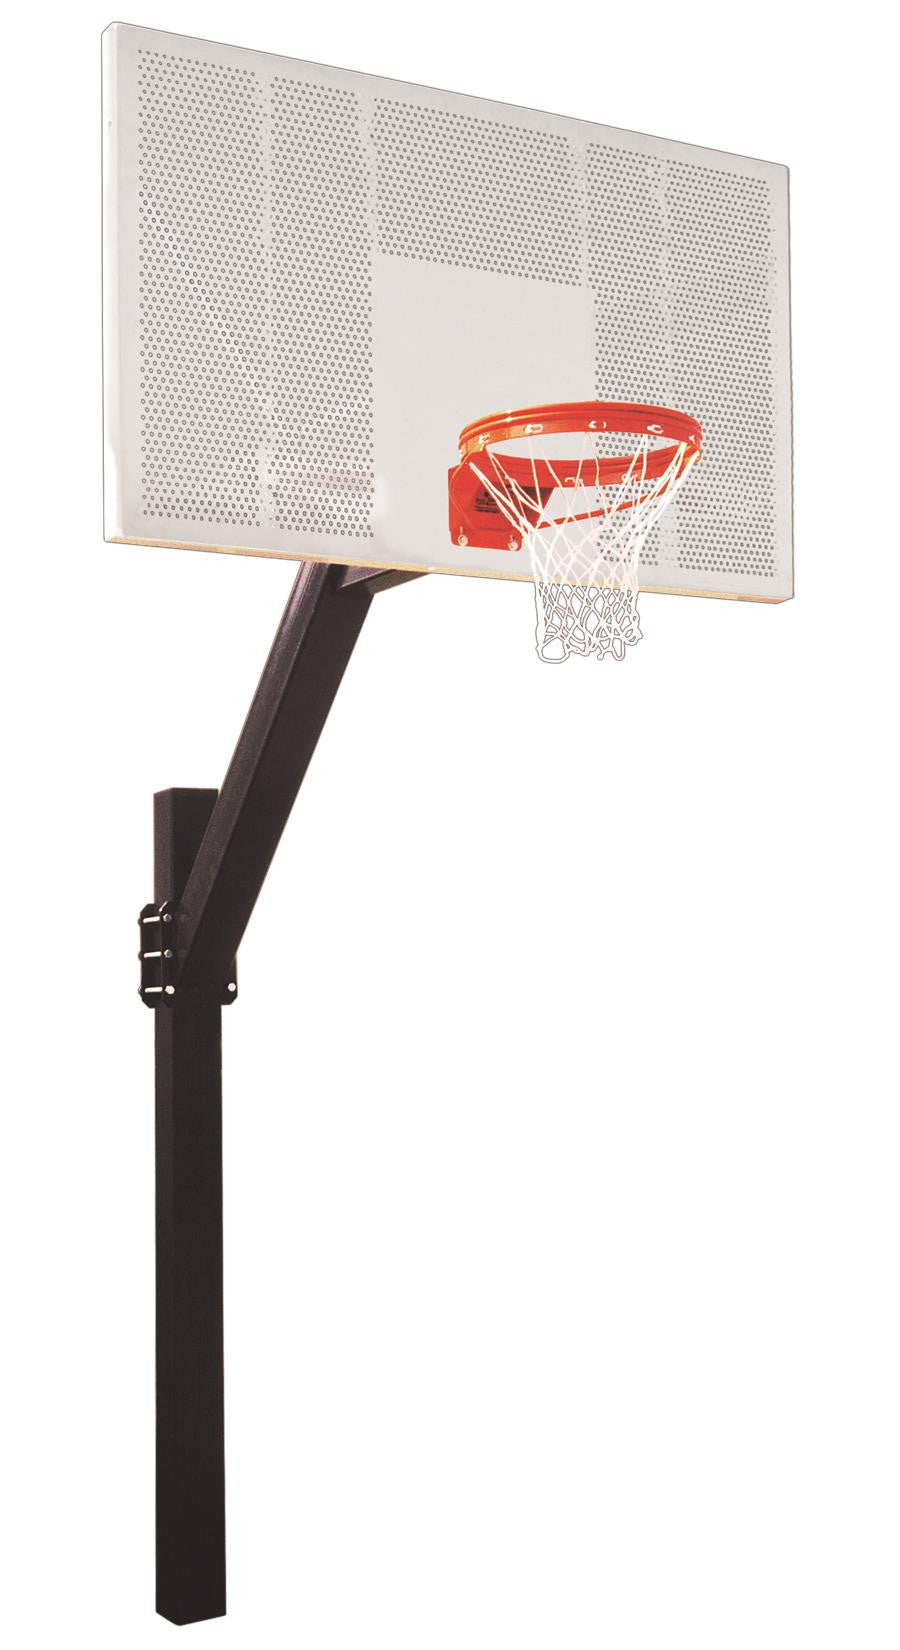 First Team Legend Intensity In Ground Fixed Height Outdoor Basketball Hoop 72 inch Perforated Aluminum